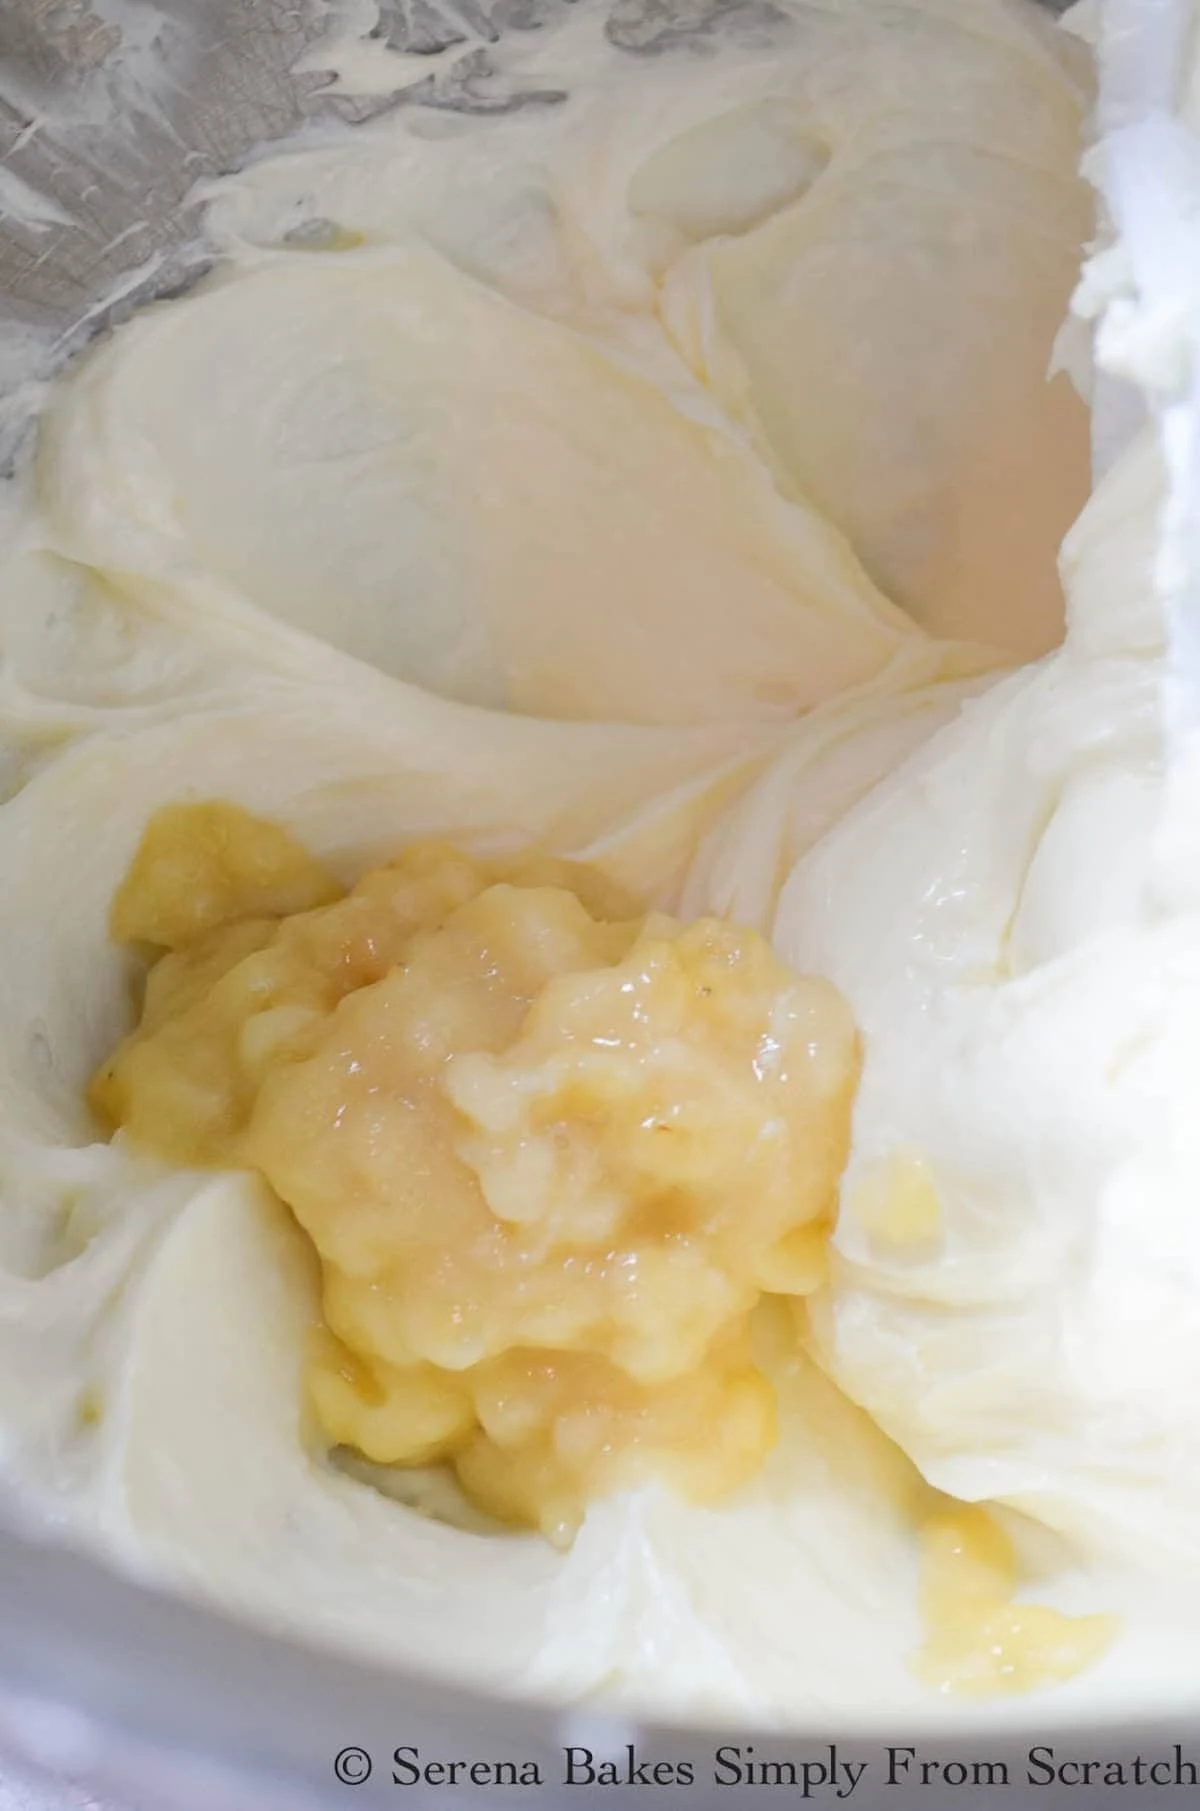 Mashed Banana added to the beaten cream cheese mixture in a mixing bowl.